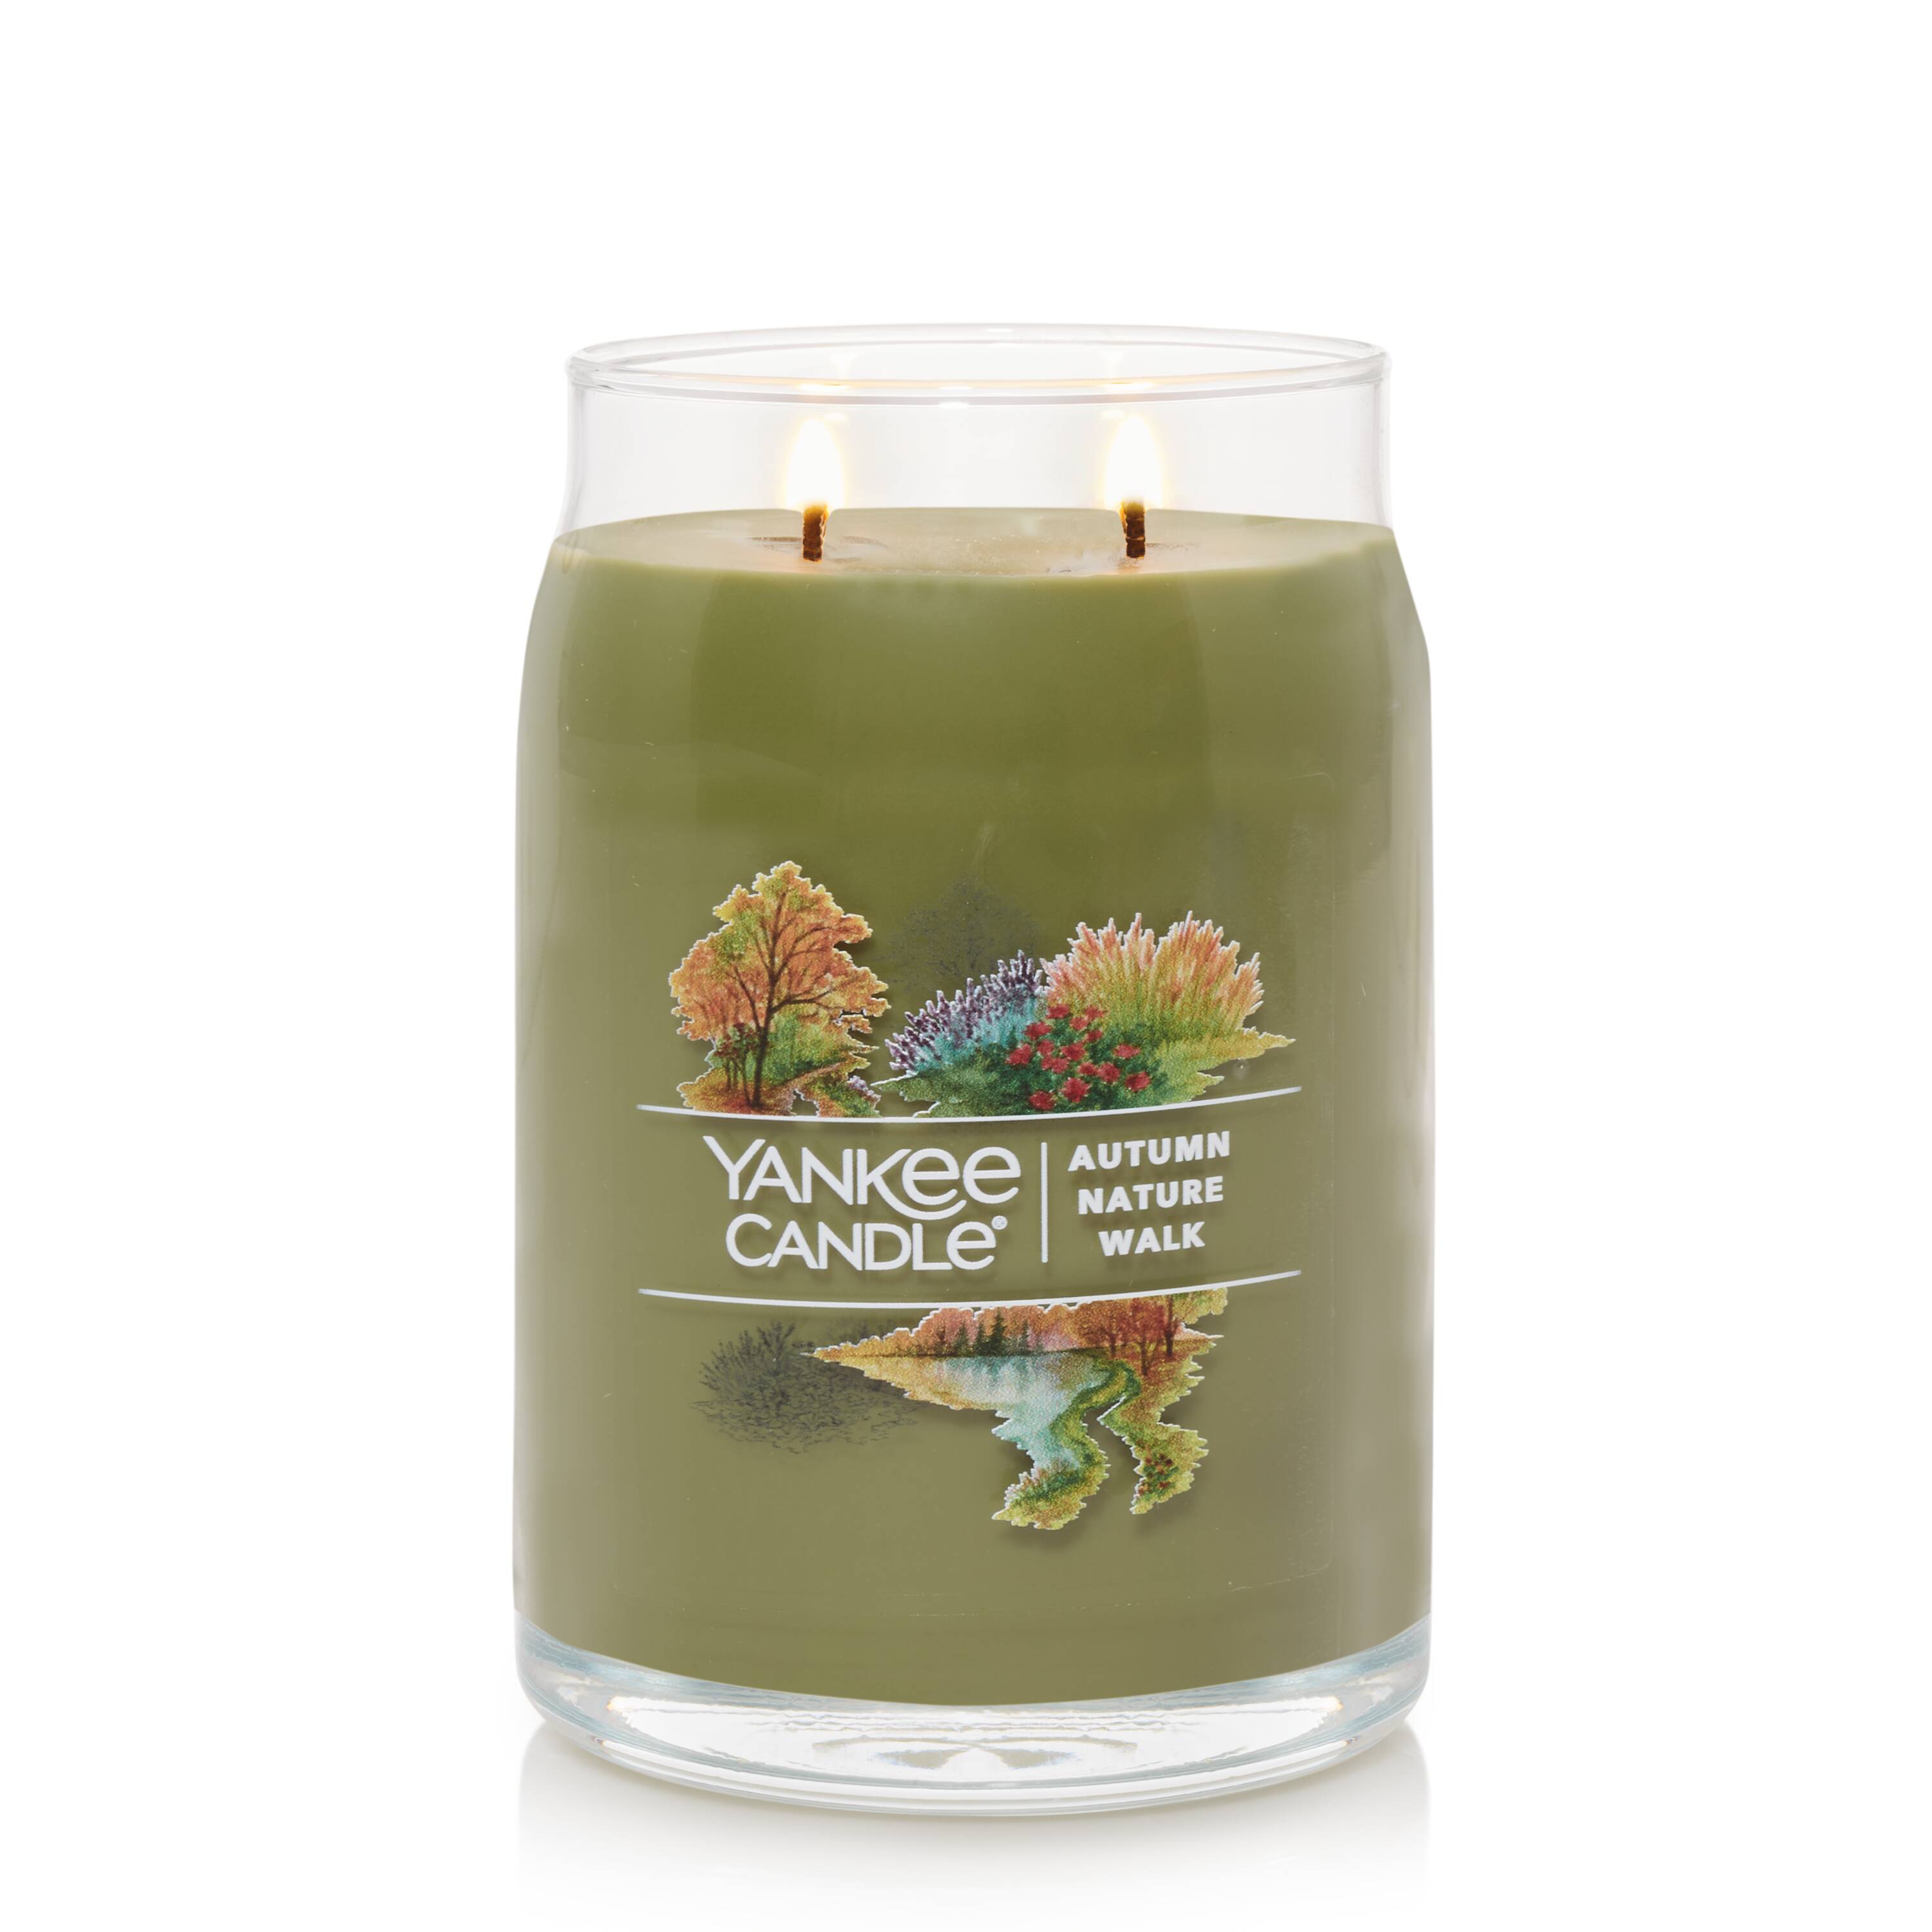 Yankee Candle Catching Rays Tarts Wax Melts, Fresh & Clean Scent